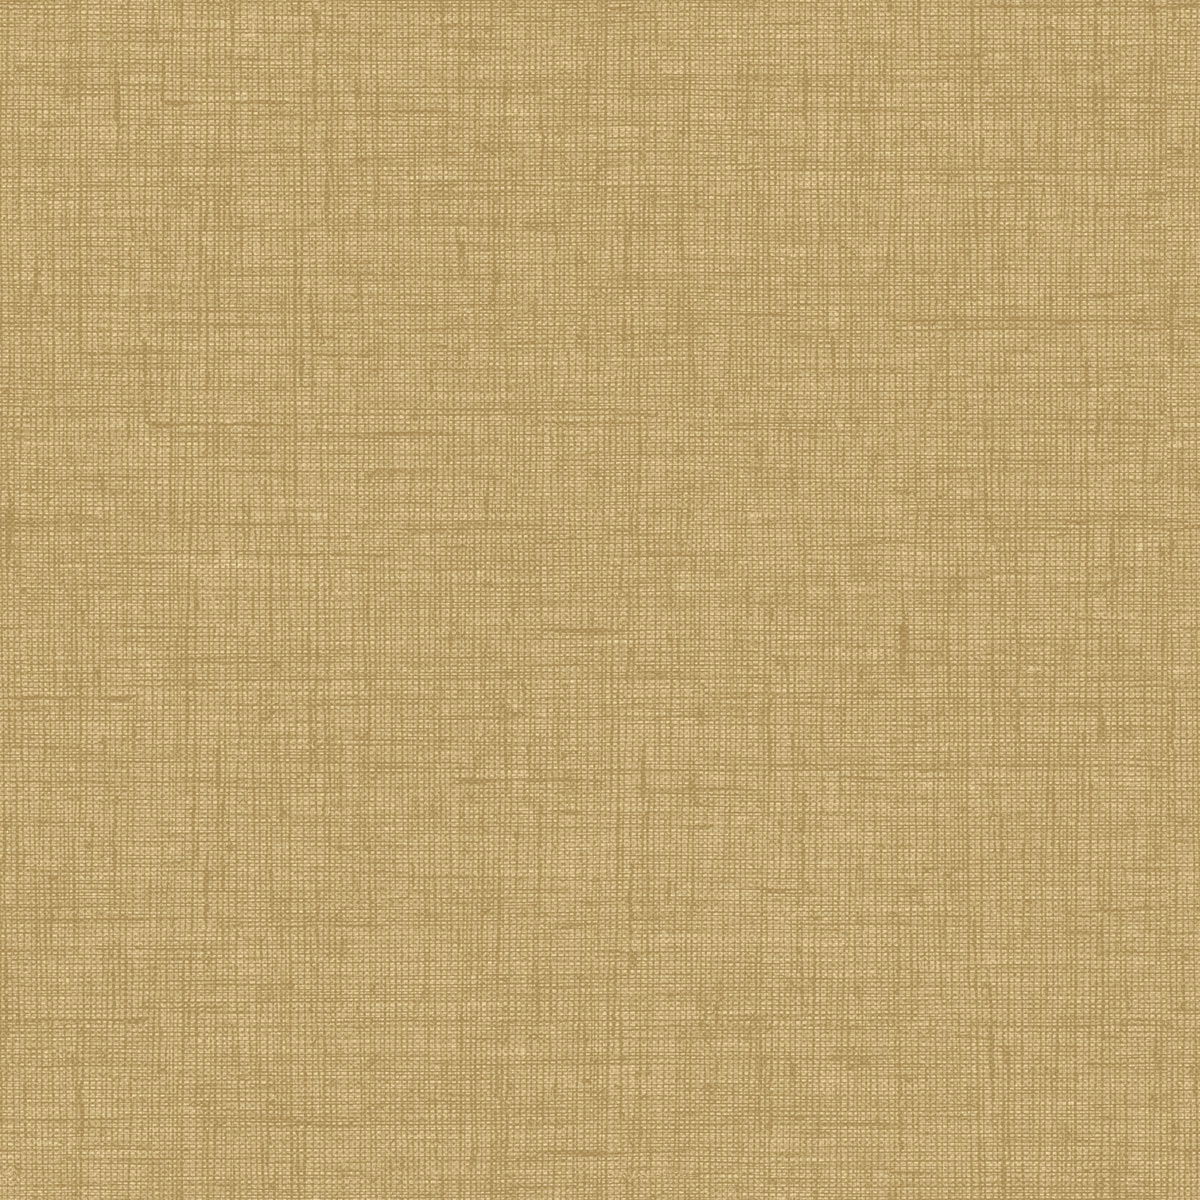 Schumacher Wallcovering Burlap Weave Java 5000866 - My Fabric Connection